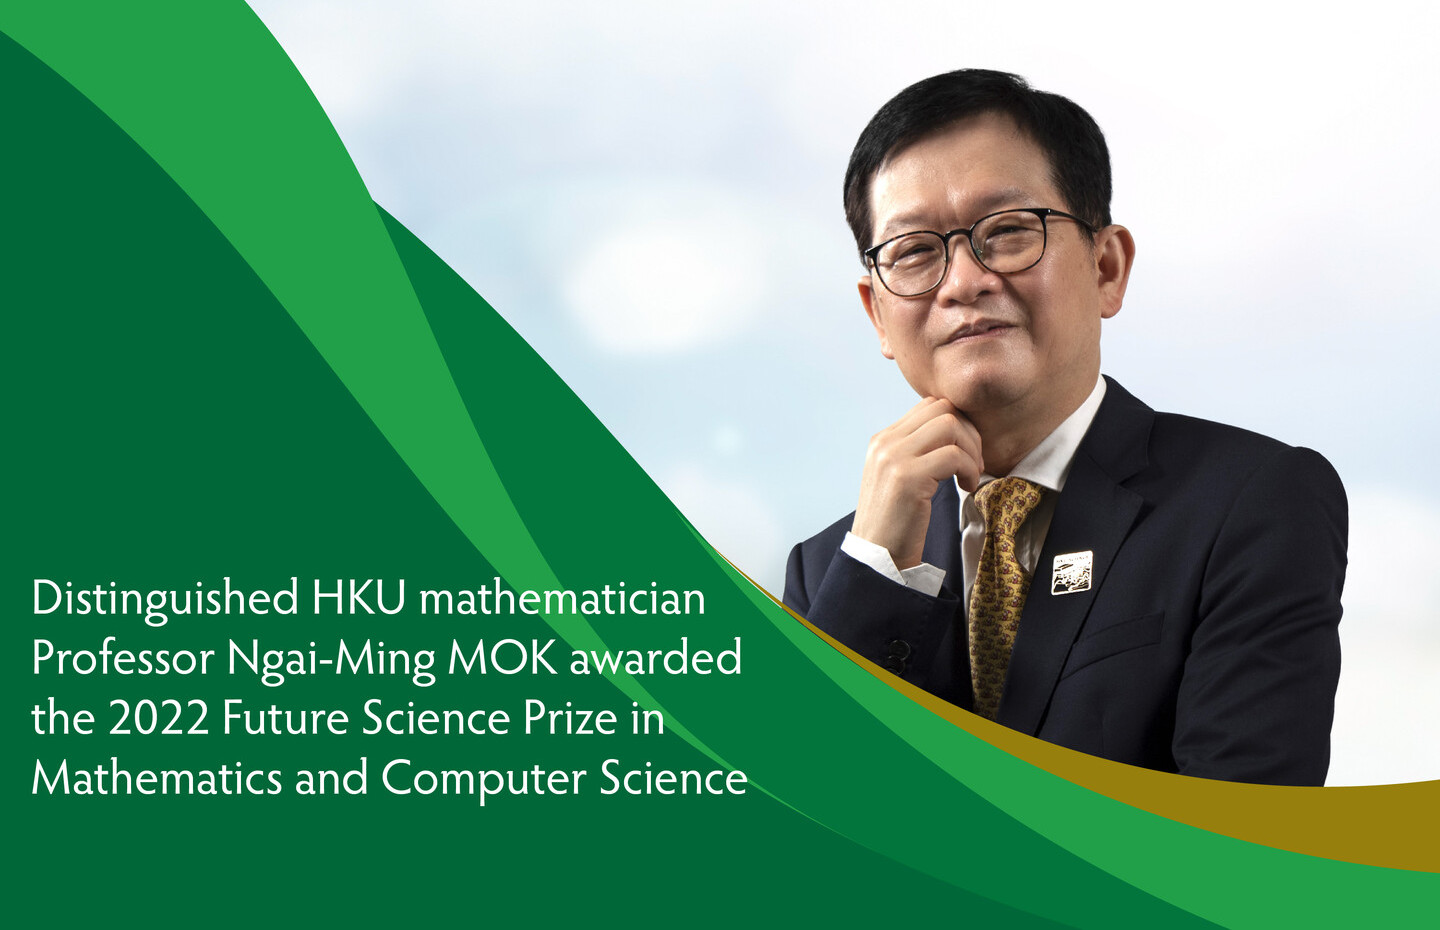 Distinguished HKU mathematician Professor Ngai-Ming MOK awarded the 2022 Future Science Prize in Mathematics and Computer Science